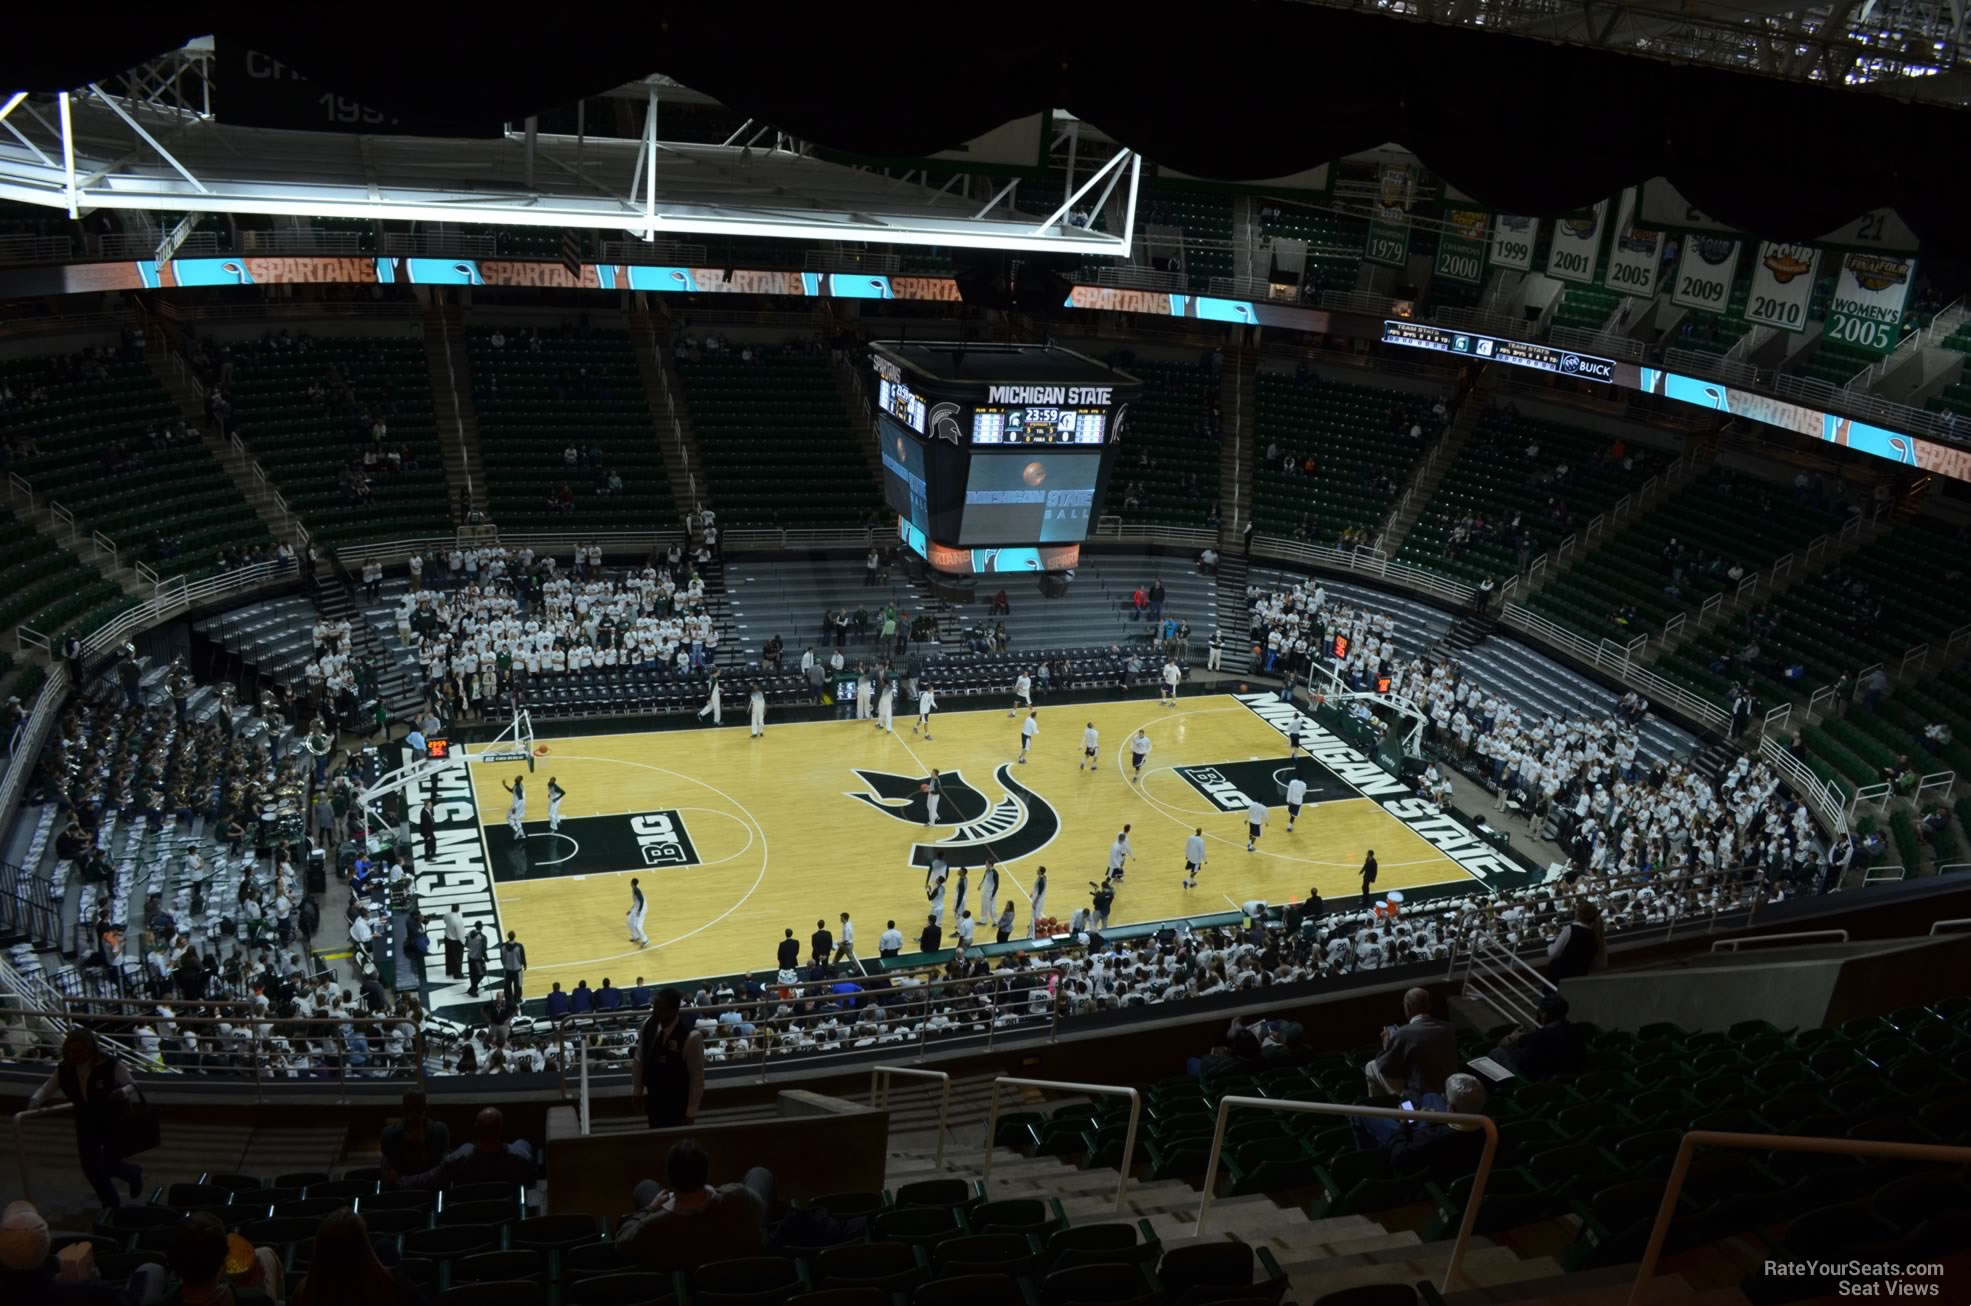 section 211, row 15 seat view  - breslin center